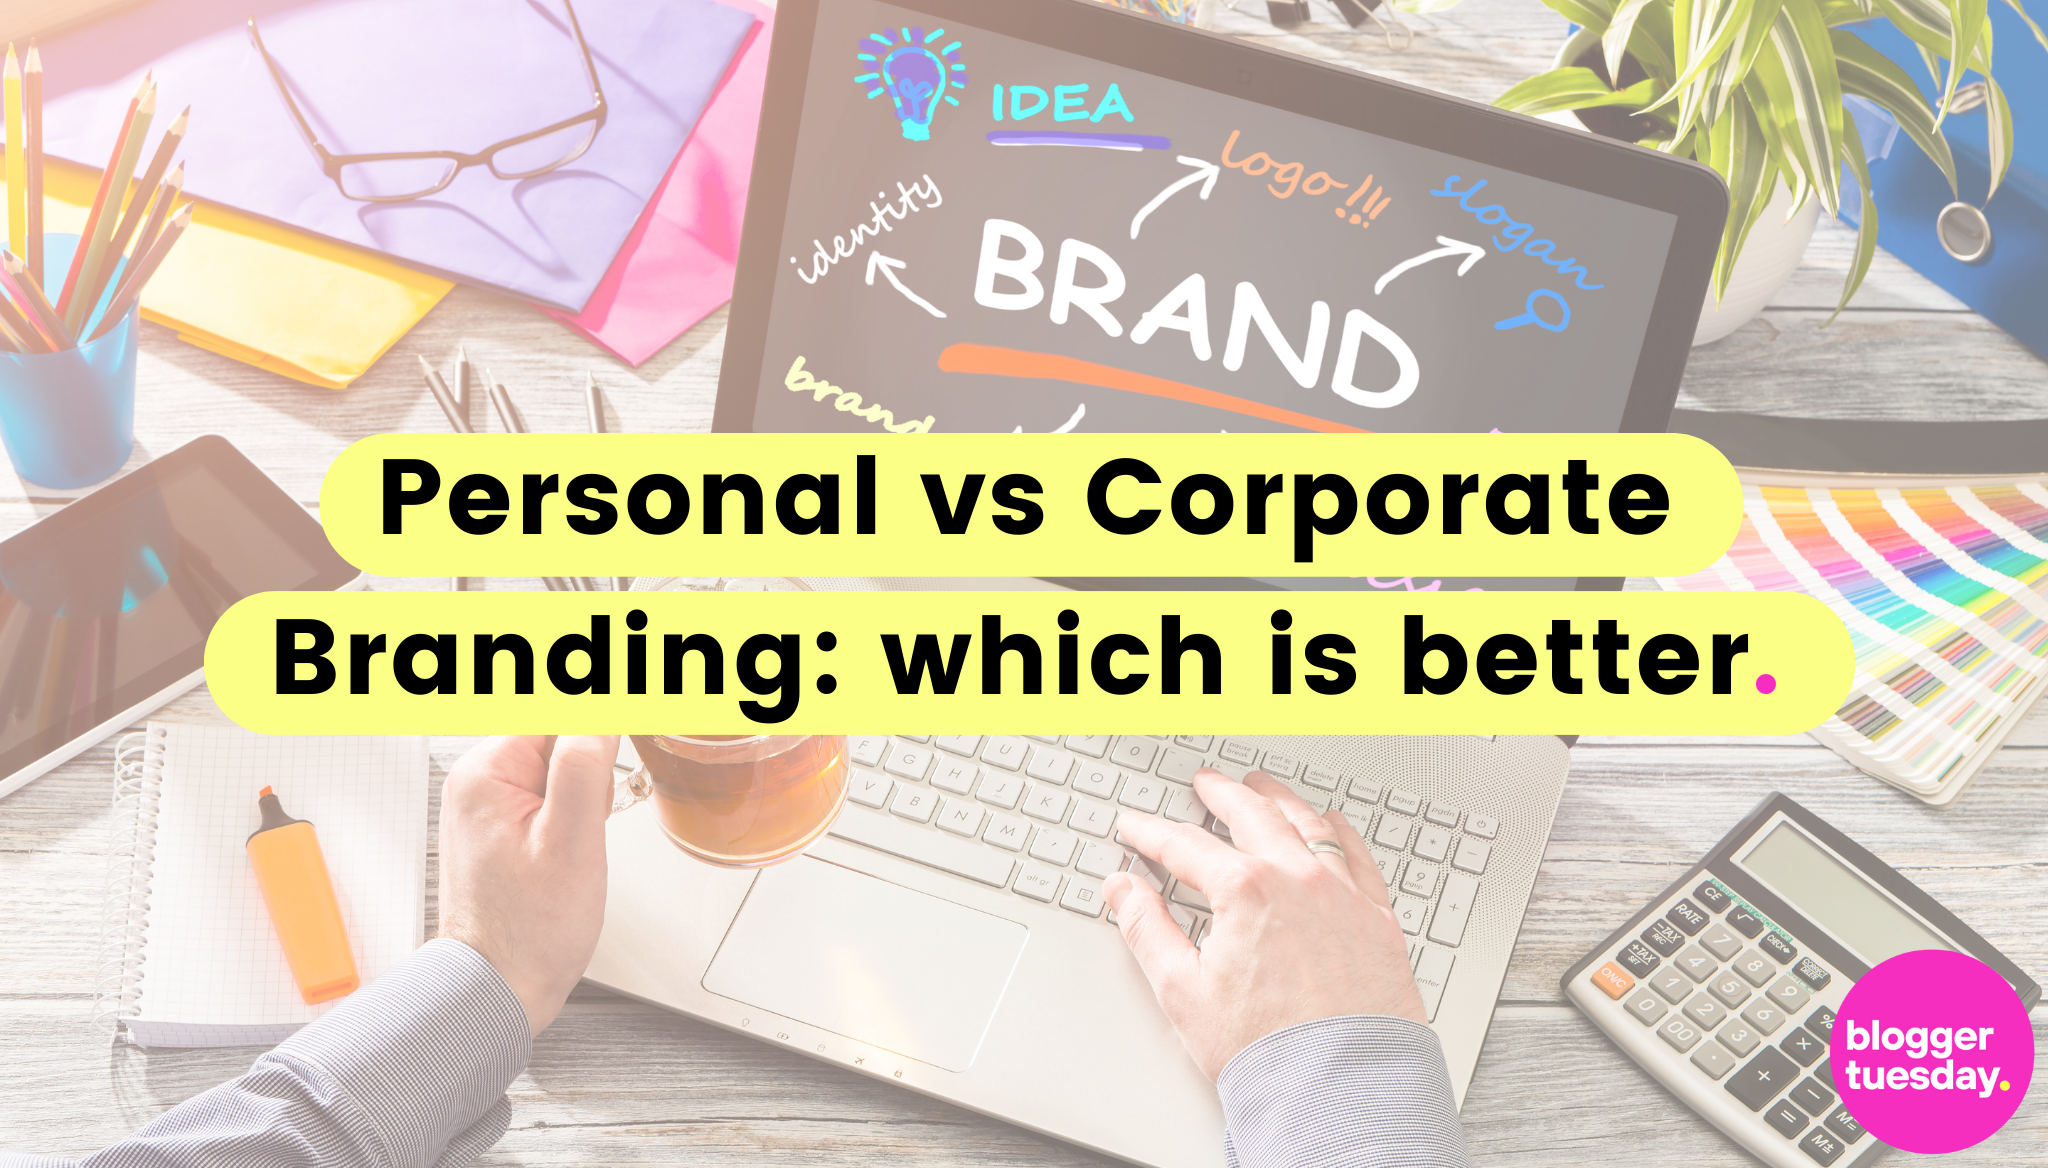 Personal vs corporate branding which is better